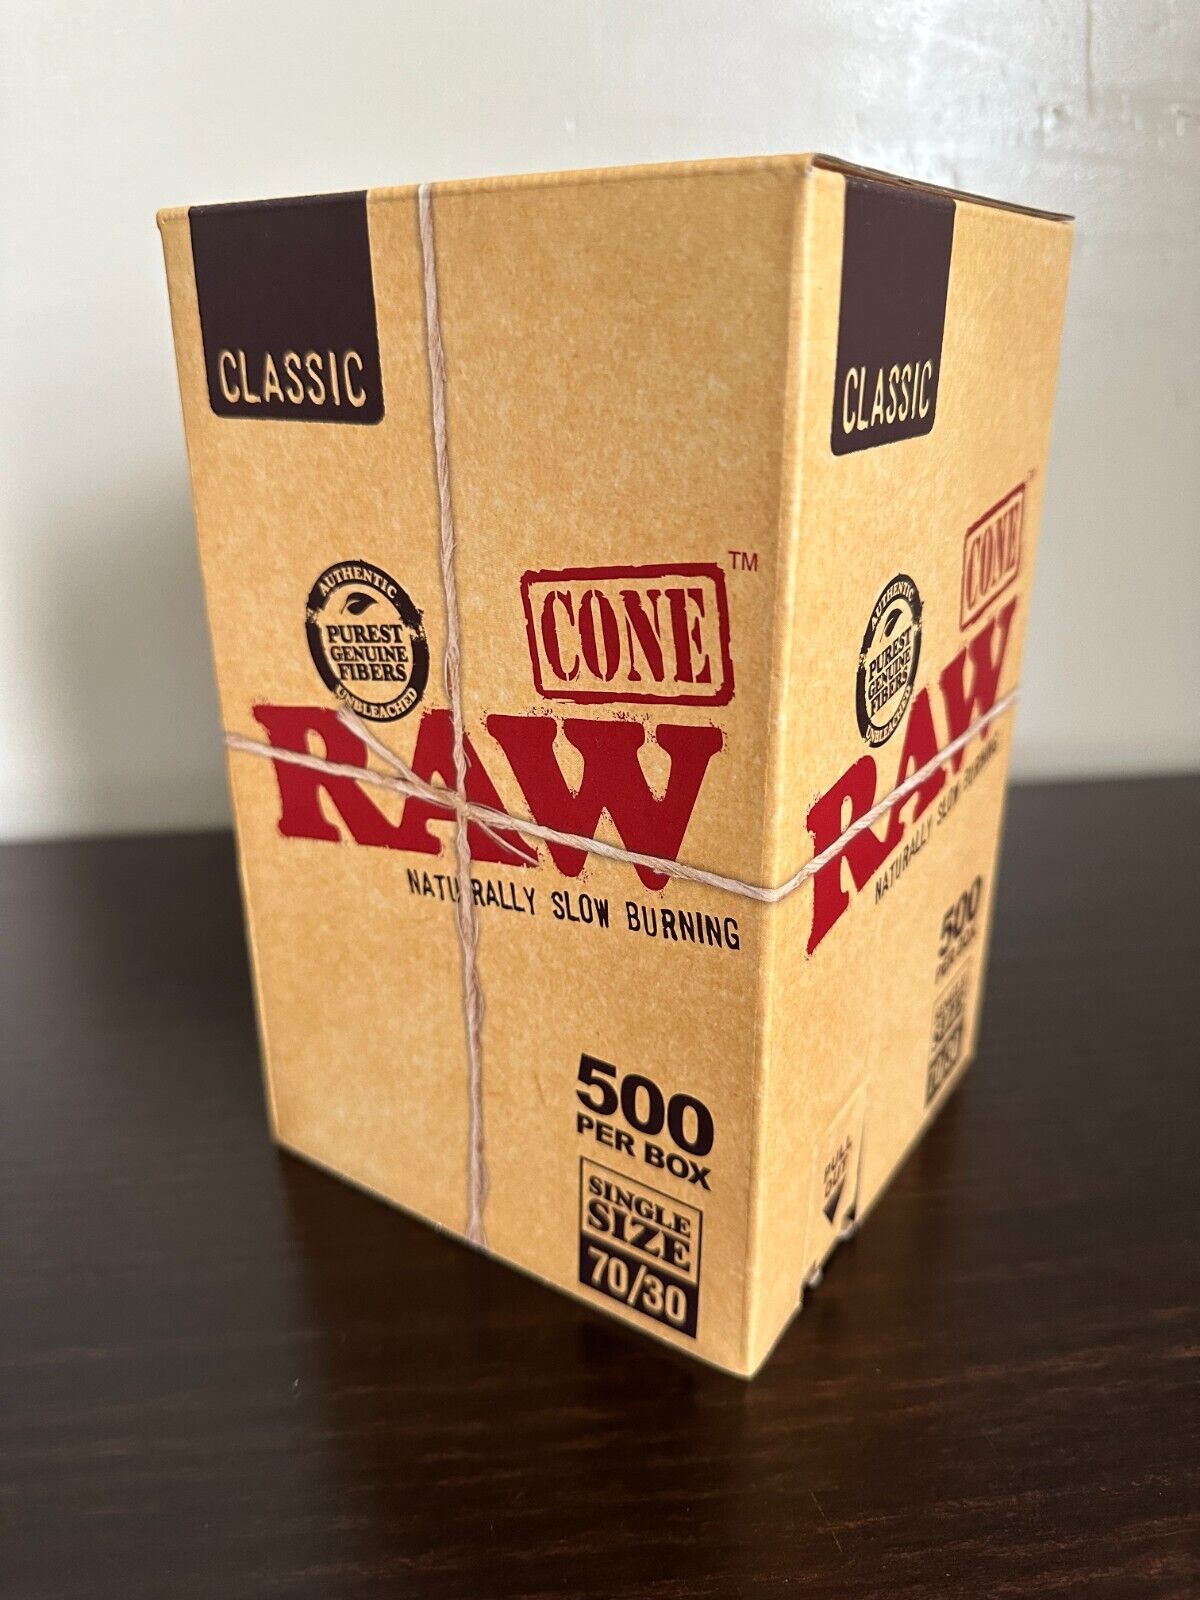 RAW Classic Single Size 70/30 Dog Walkers 500 Count Cones Factory Bulk Box